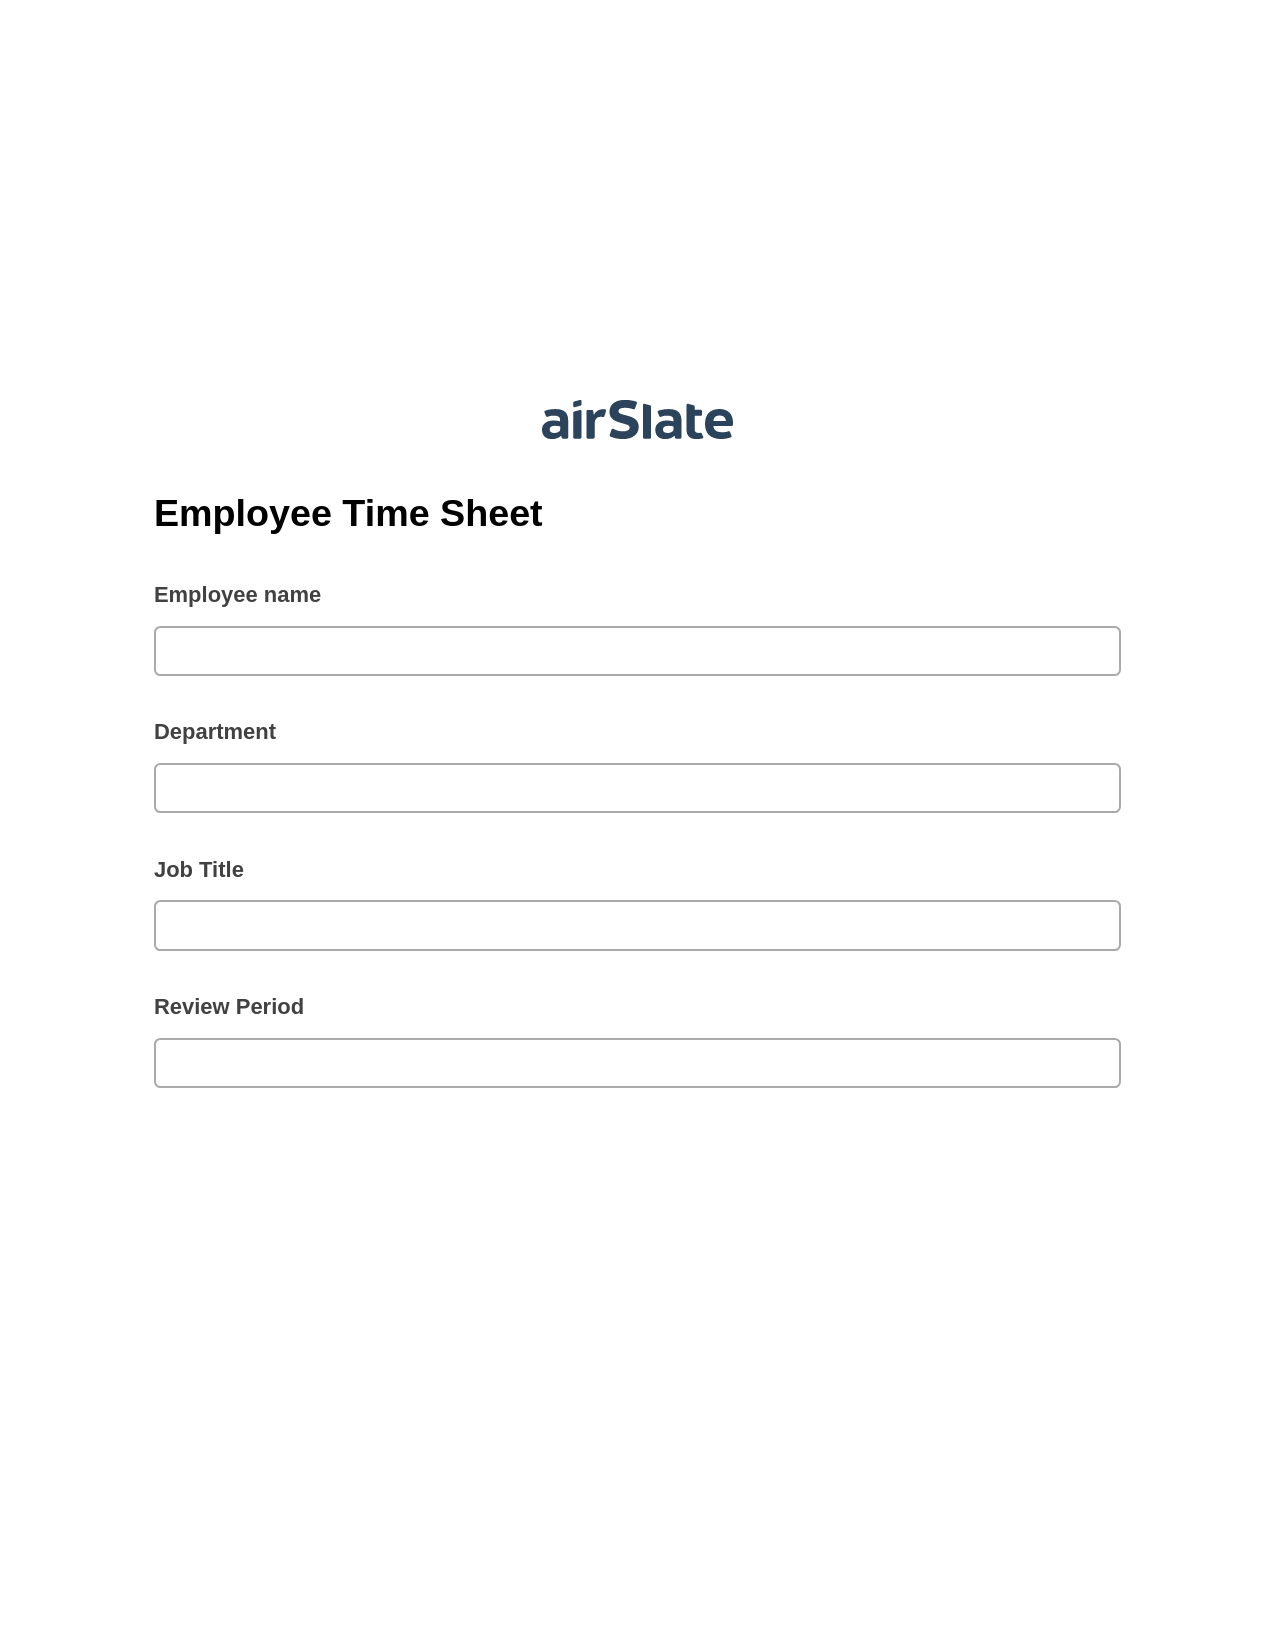 Multirole Employee Time Sheet Prefill from NetSuite records, Send a Slate with Roles Bot, Archive to Dropbox Bot